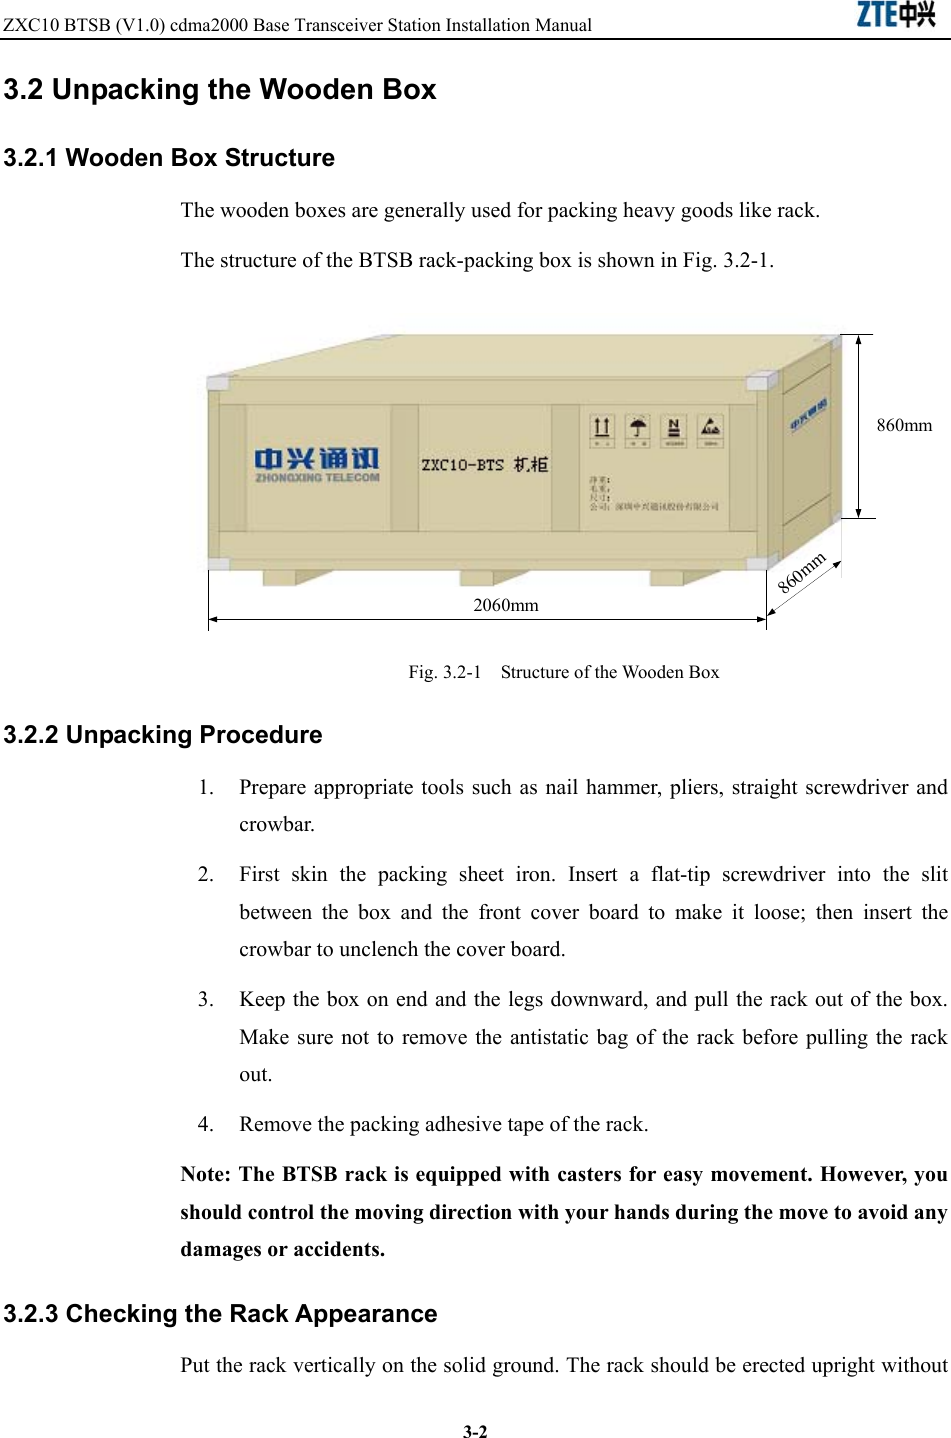 ZXC10 BTSB (V1.0) cdma2000 Base Transceiver Station Installation Manual                               3-23.2 Unpacking the Wooden Box 3.2.1 Wooden Box Structure The wooden boxes are generally used for packing heavy goods like rack. The structure of the BTSB rack-packing box is shown in Fig. 3.2-1. 2060mm860mm860mm Fig. 3.2-1    Structure of the Wooden Box 3.2.2 Unpacking Procedure 1.  Prepare appropriate tools such as nail hammer, pliers, straight screwdriver and crowbar. 2.  First skin the packing sheet iron. Insert a flat-tip screwdriver into the slit between the box and the front cover board to make it loose; then insert the crowbar to unclench the cover board. 3.  Keep the box on end and the legs downward, and pull the rack out of the box. Make sure not to remove the antistatic bag of the rack before pulling the rack out. 4.  Remove the packing adhesive tape of the rack. Note: The BTSB rack is equipped with casters for easy movement. However, you should control the moving direction with your hands during the move to avoid any damages or accidents.   3.2.3 Checking the Rack Appearance Put the rack vertically on the solid ground. The rack should be erected upright without 